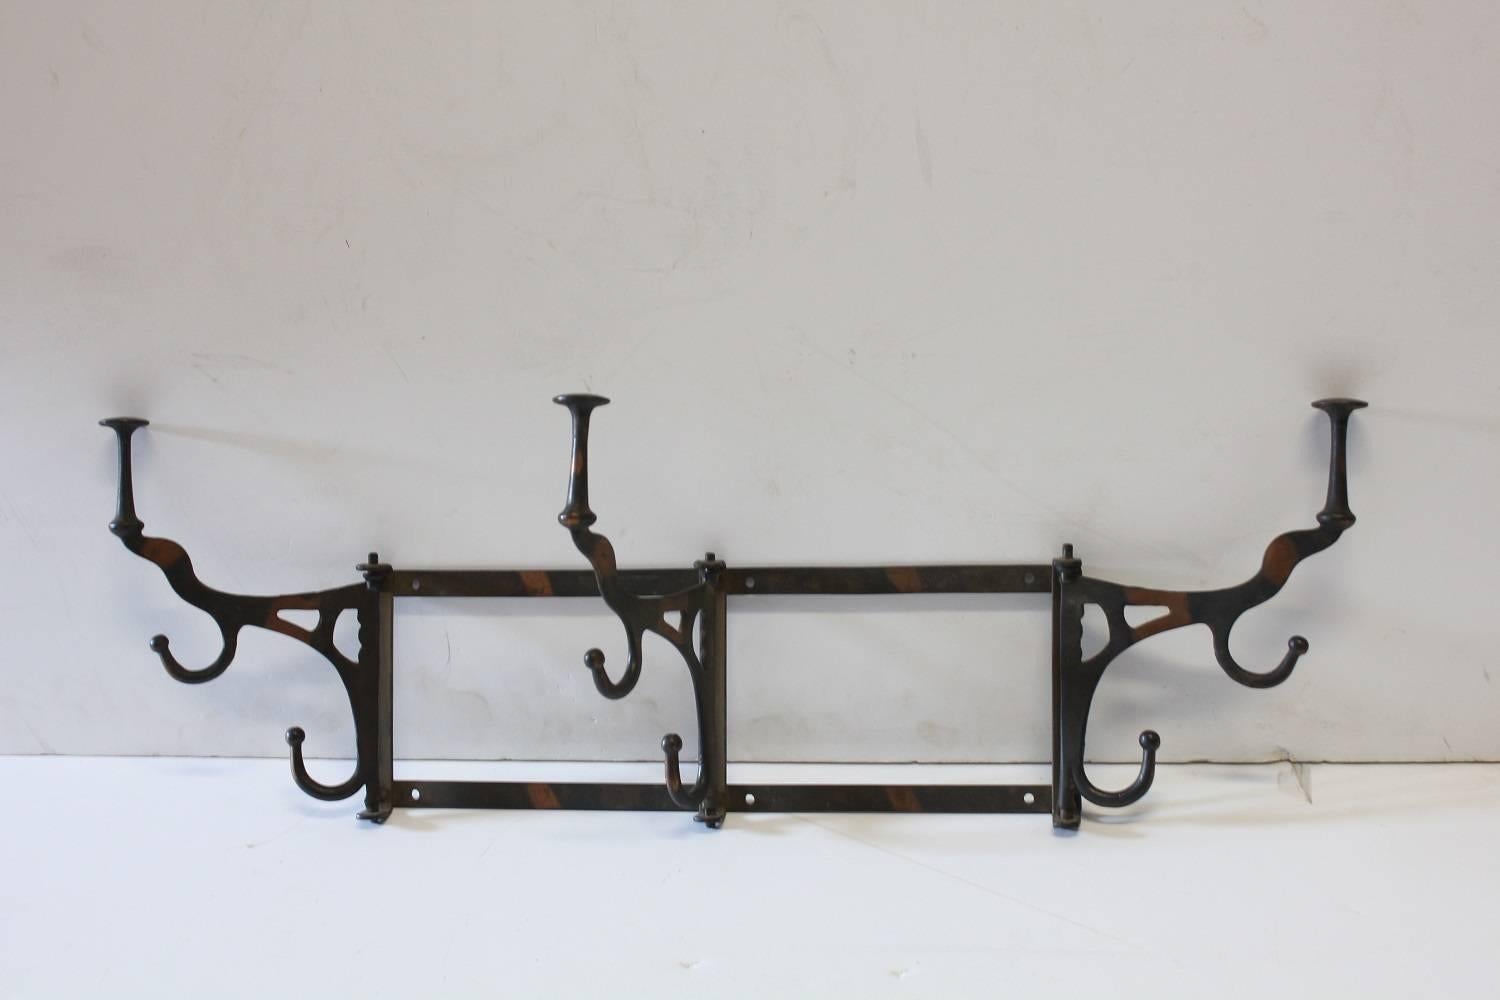 Antique Coat And Hat Wall Rack. We have two racks available. Listed price is for each rack.